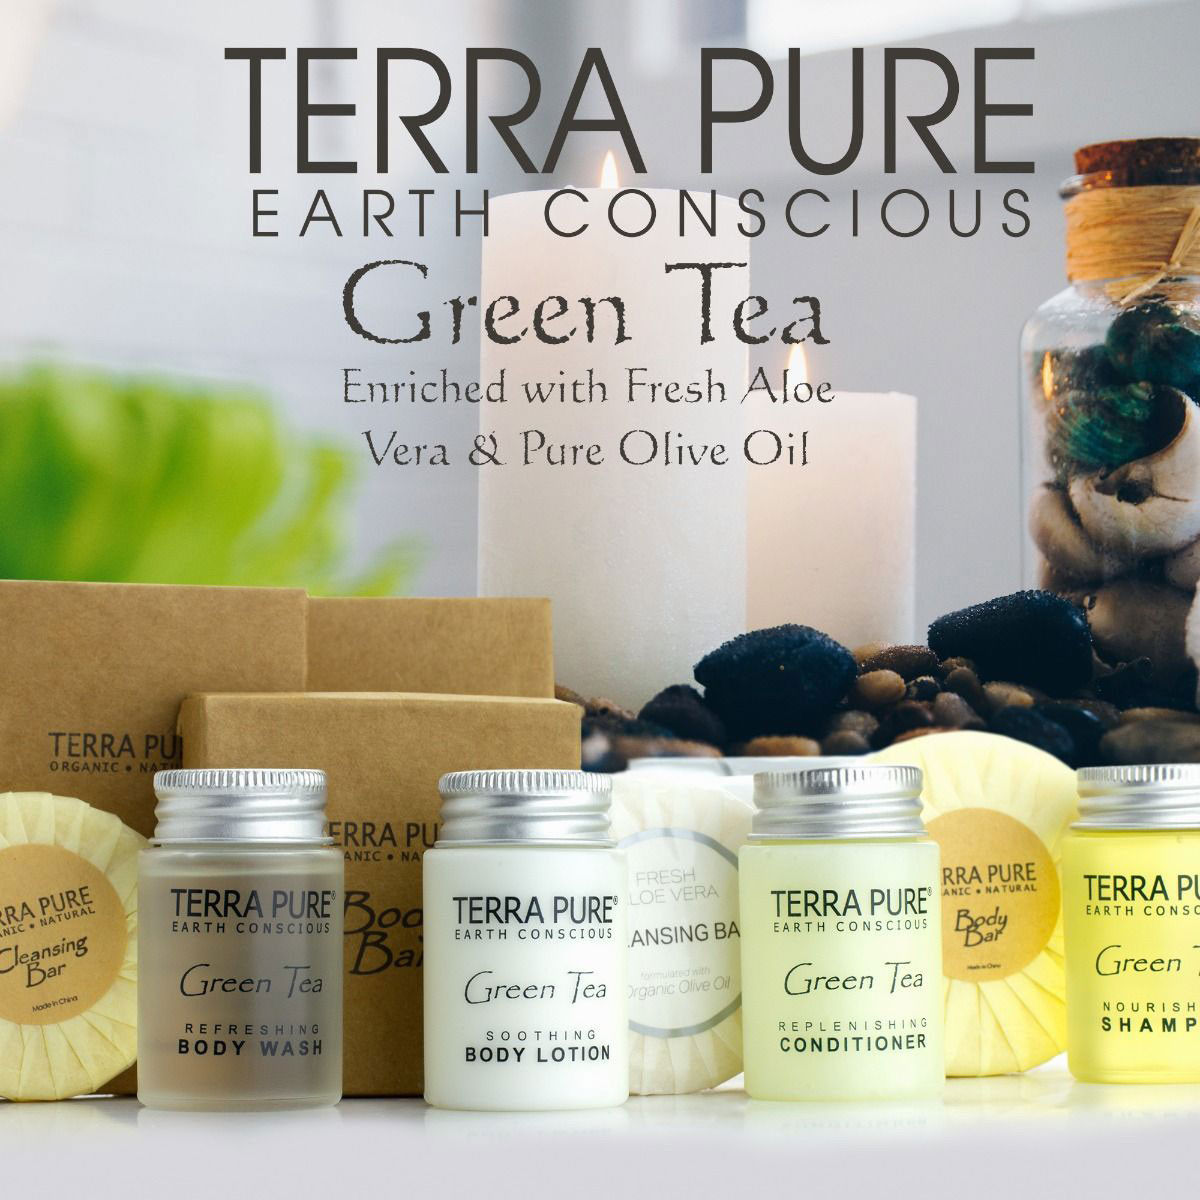 TERRA PURE GREEN TEA Collection Questions & Answers